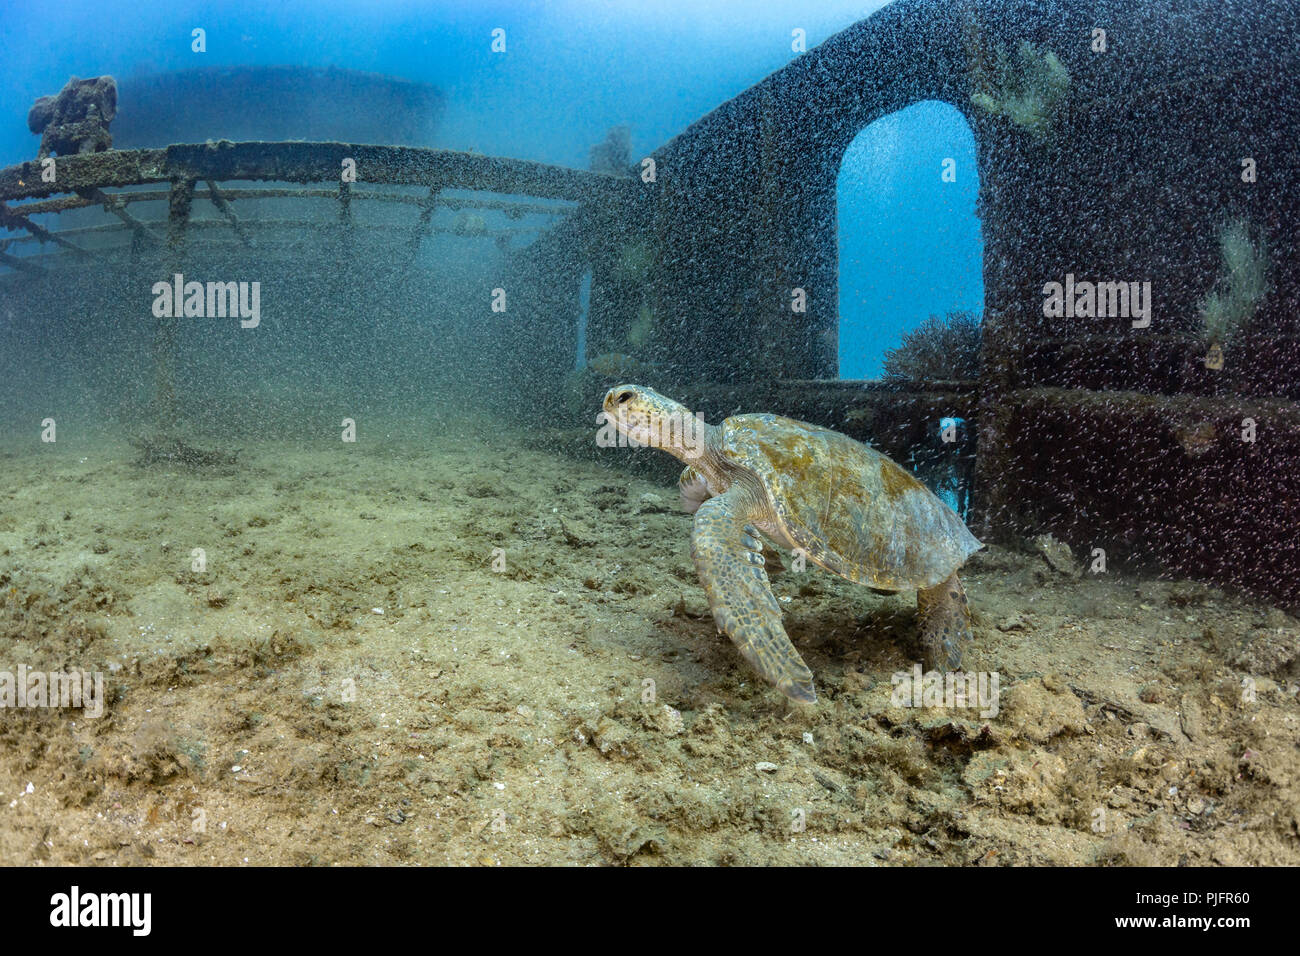 Turtle on the Fang Ming Wreck, La Paz, Sea of Cortez Stock Photo